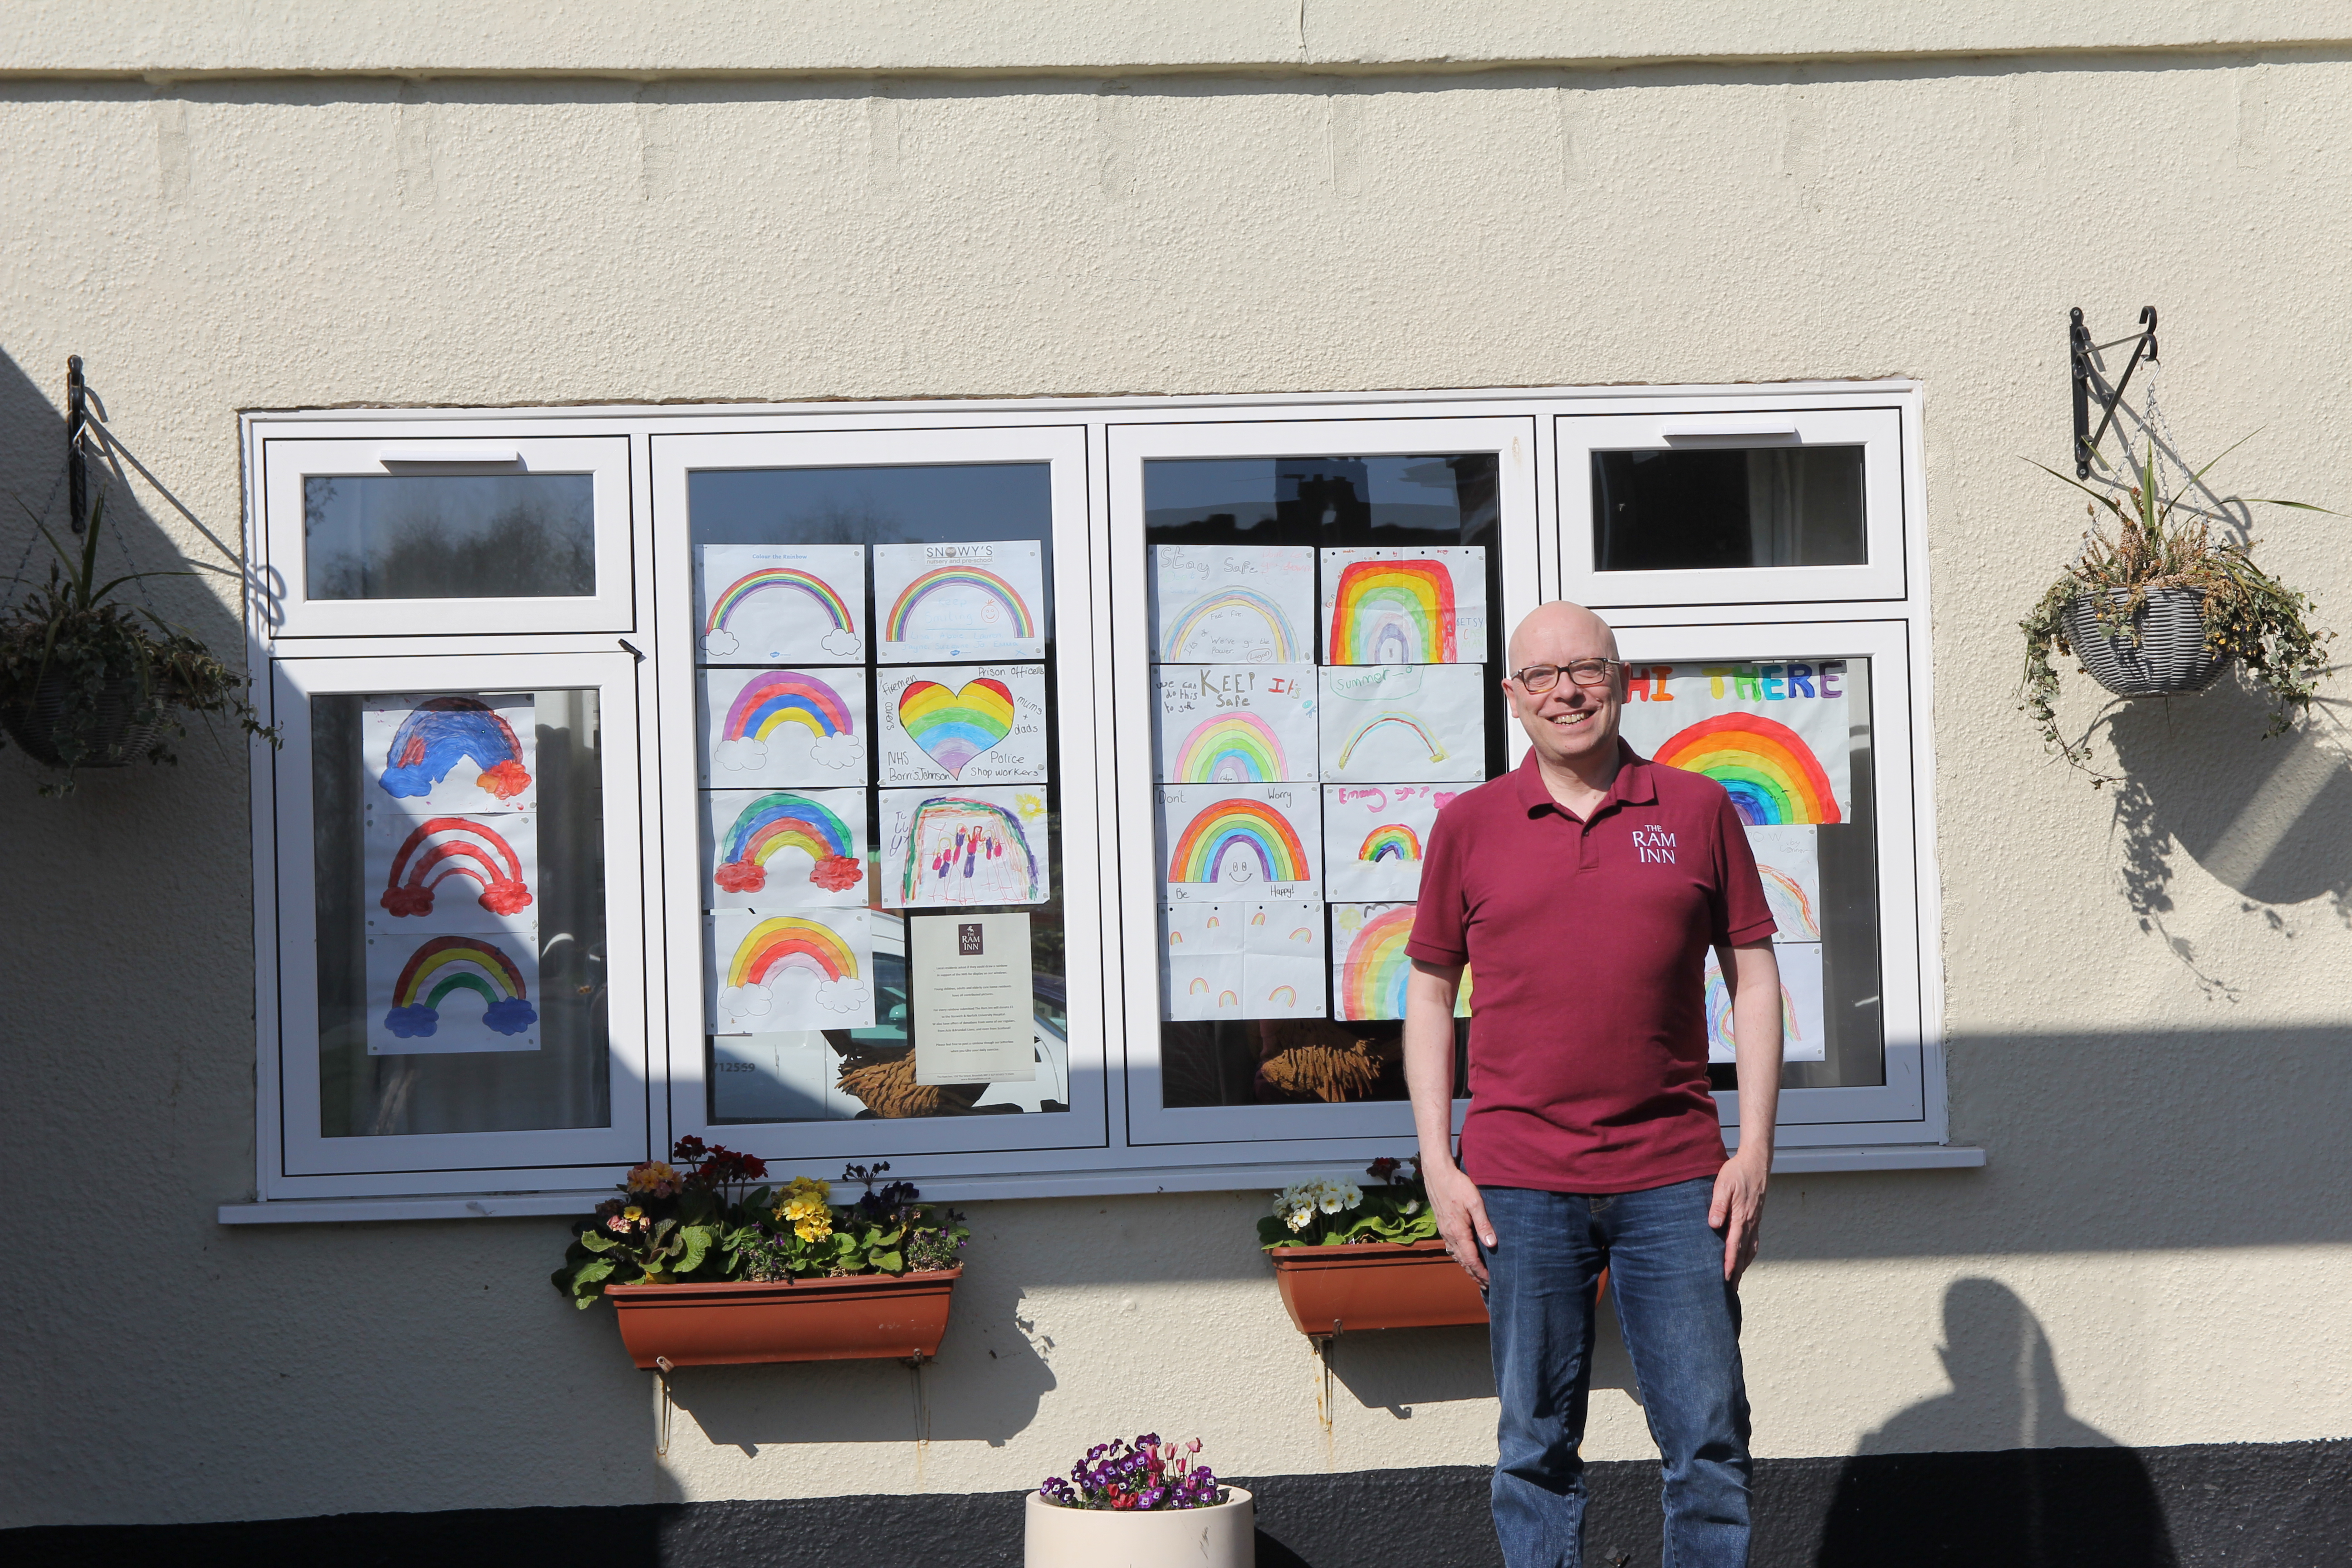 The Ram Inn in Brundall, with pictures of rainbows stuck in the windows